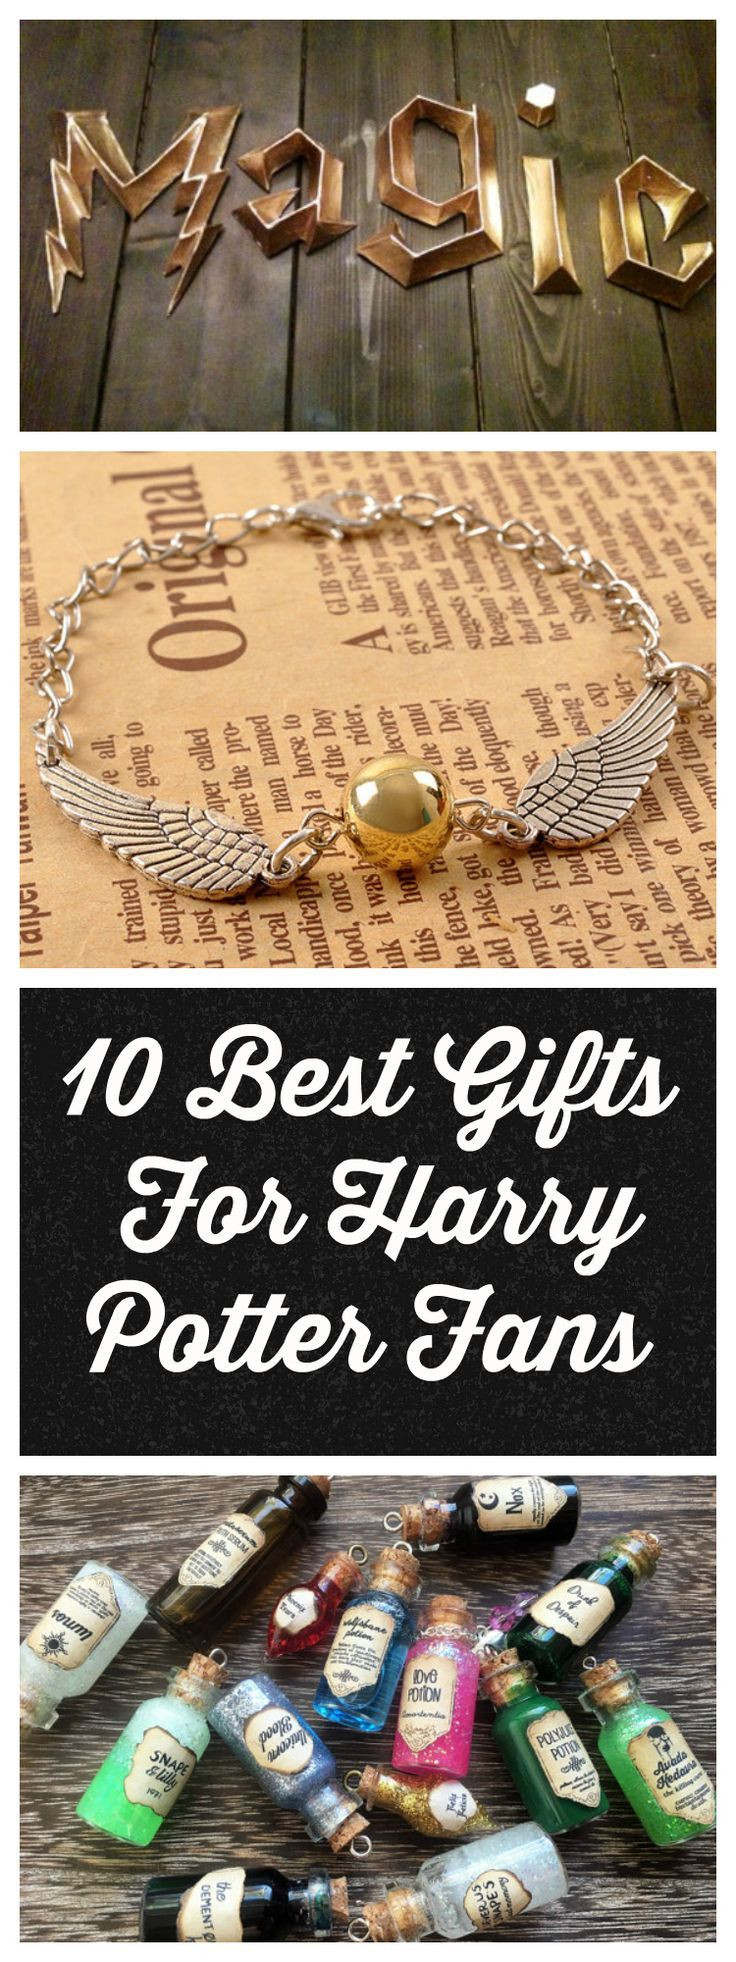 Harry Potter Birthday Gift Ideas
 328 best images about My Book Club on Pinterest